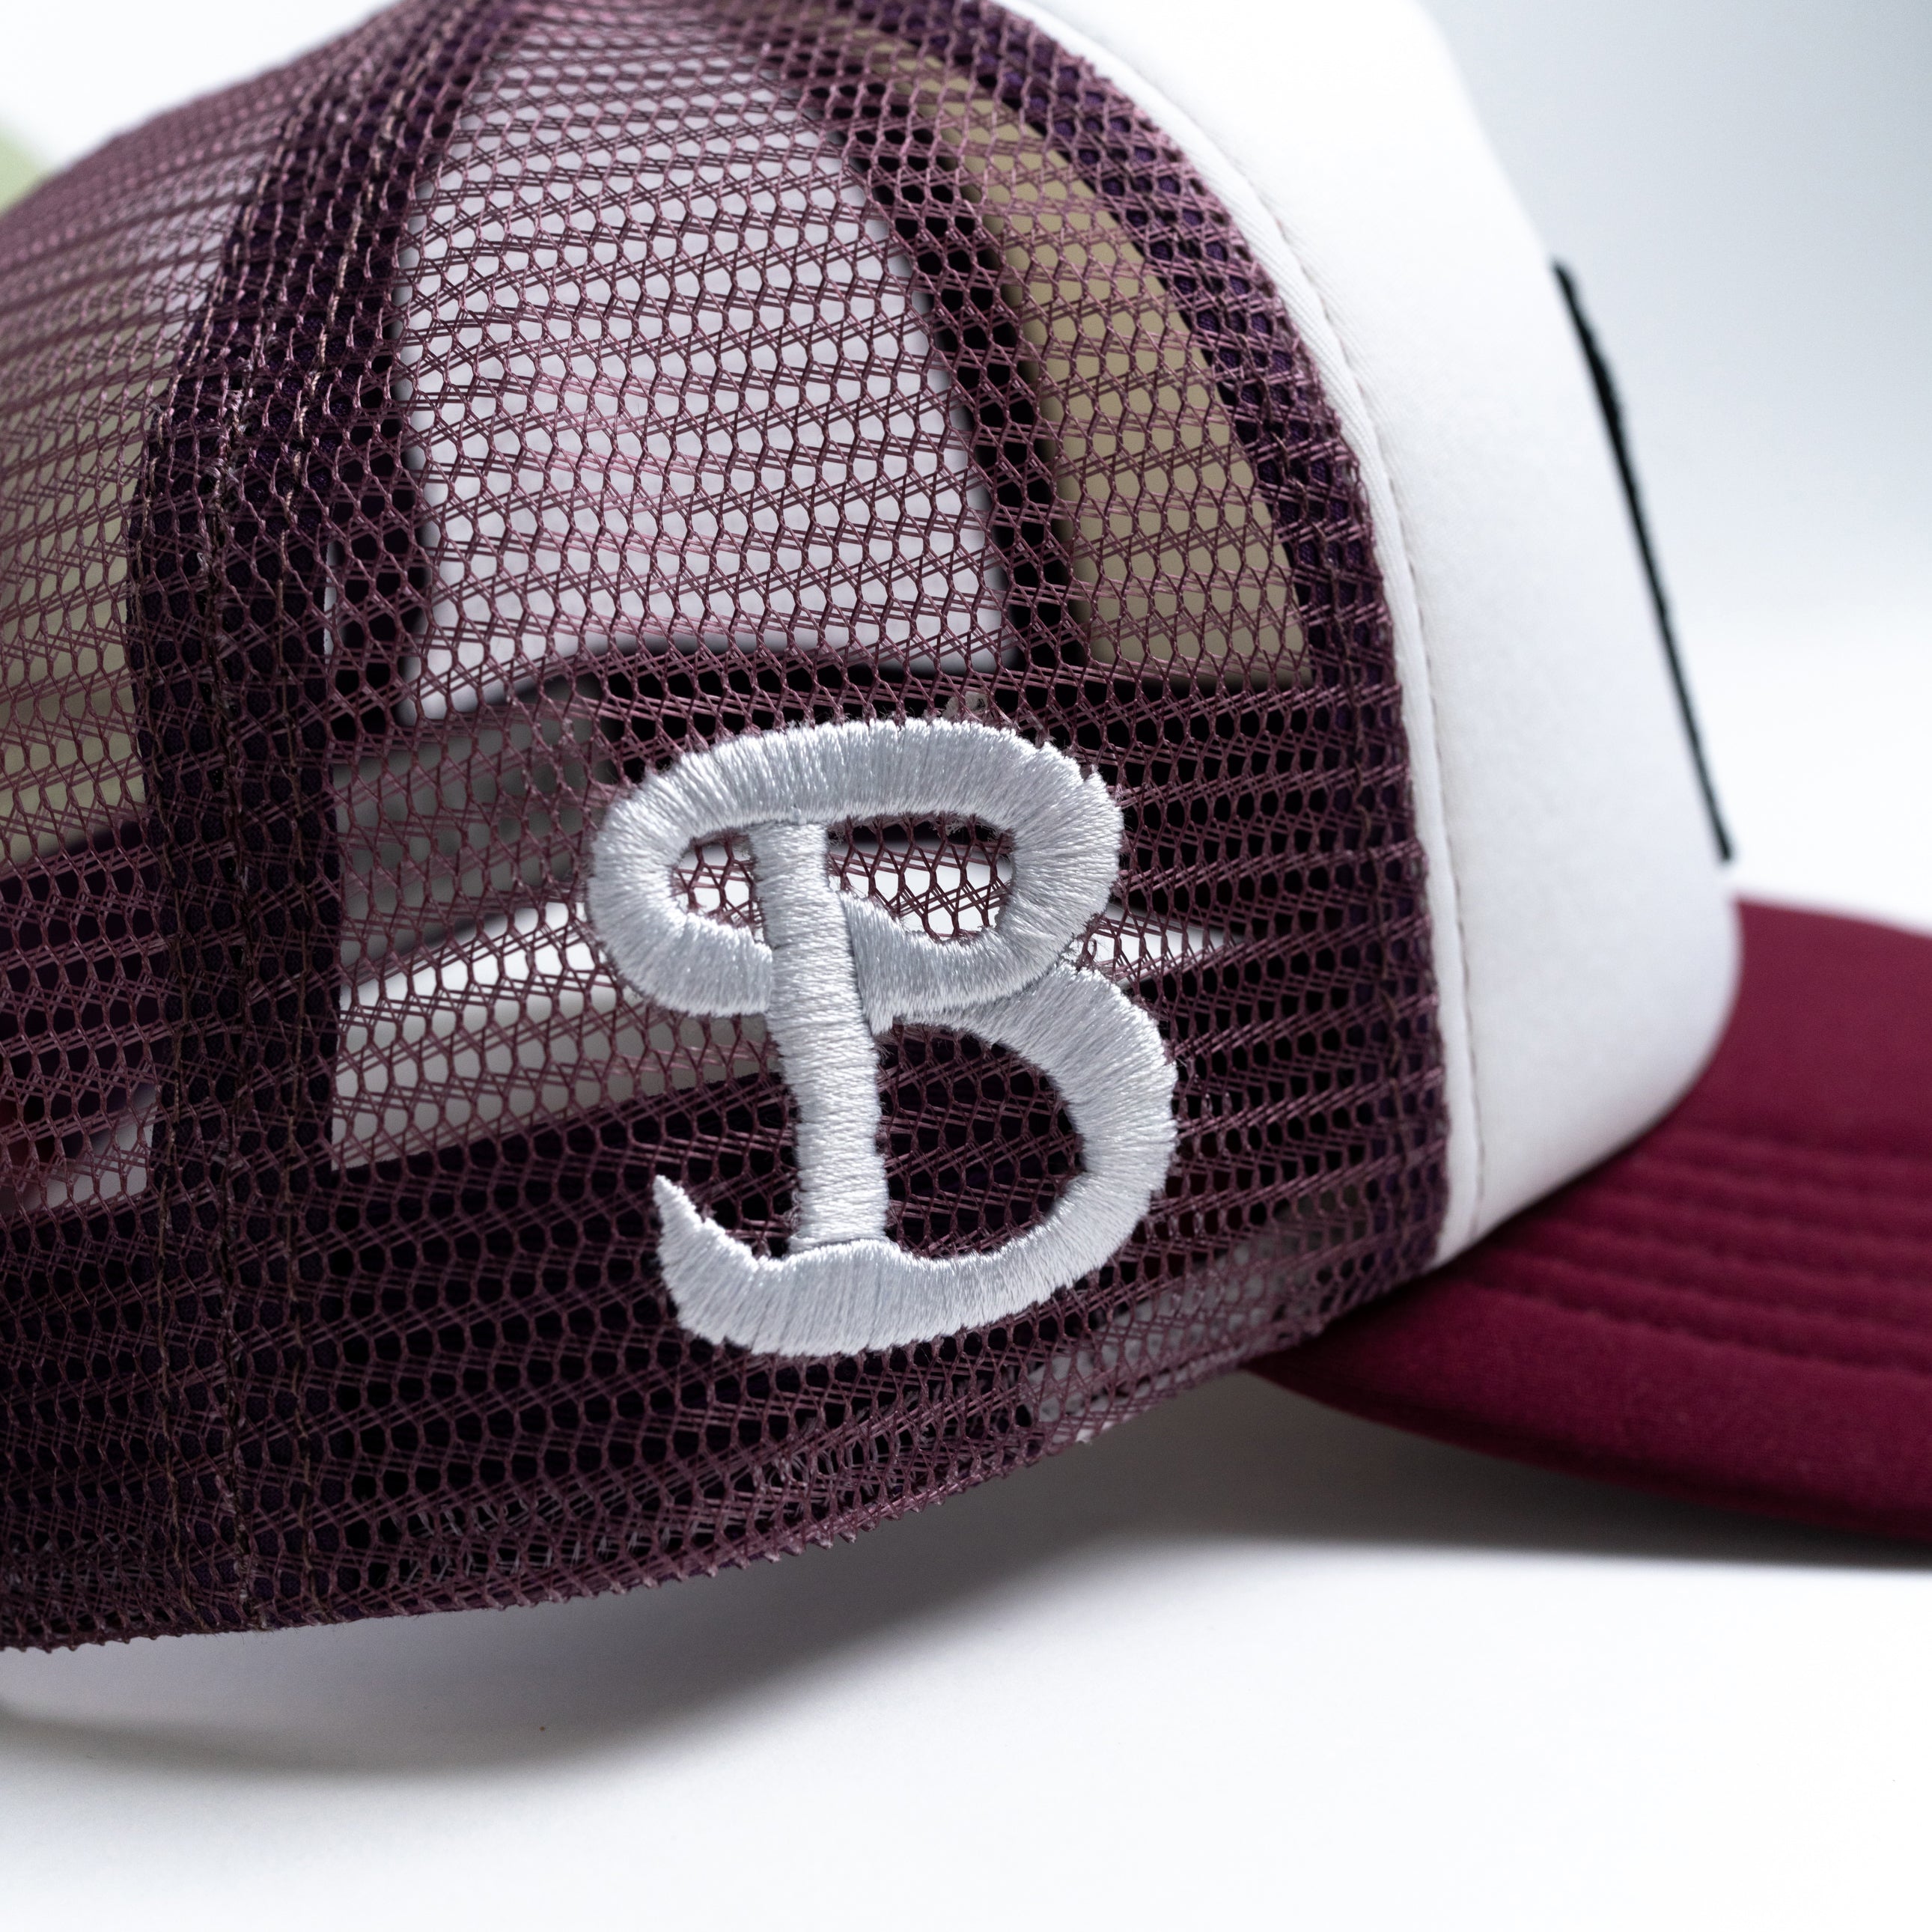 Patch Hat - Maroon & White